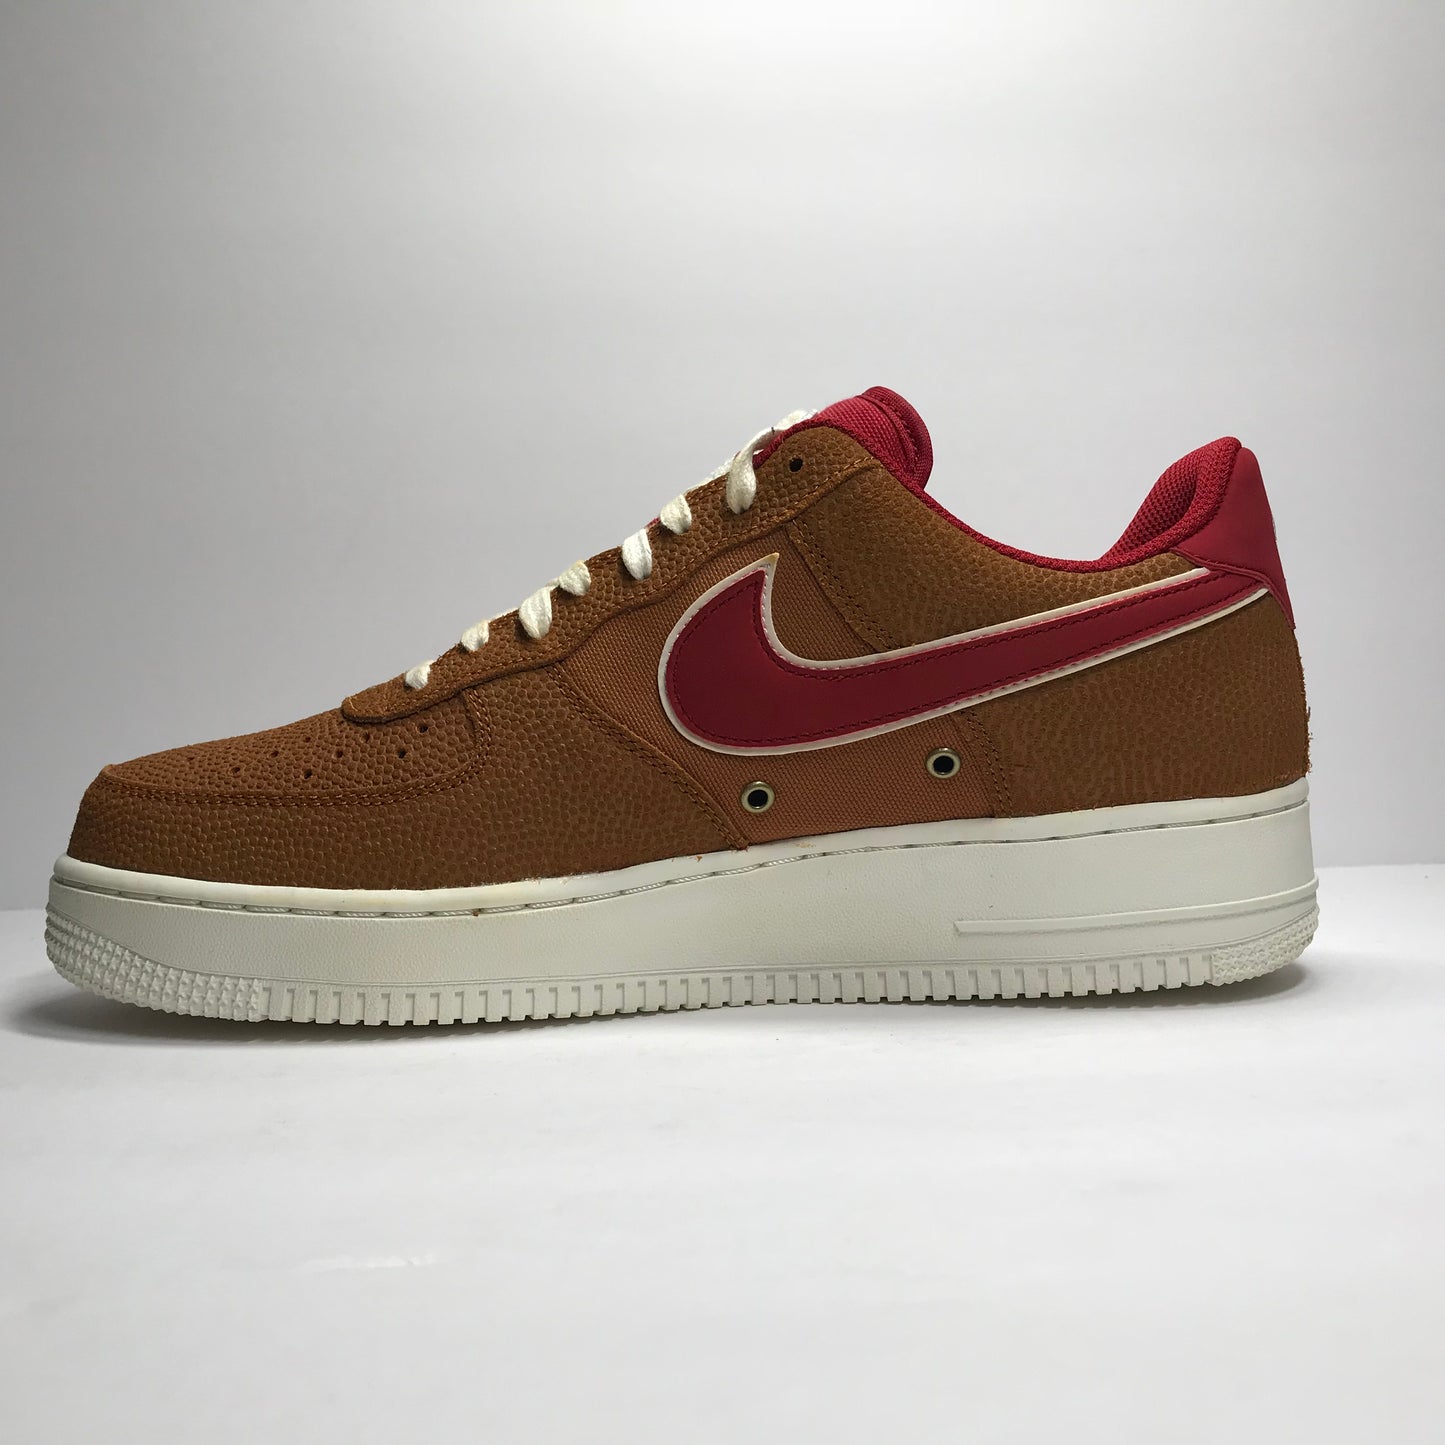 Nike Air Force 1 Low '07 LV8 - 718152 206  - Size 9.5 Tawny/Gym Red Basketball Leather